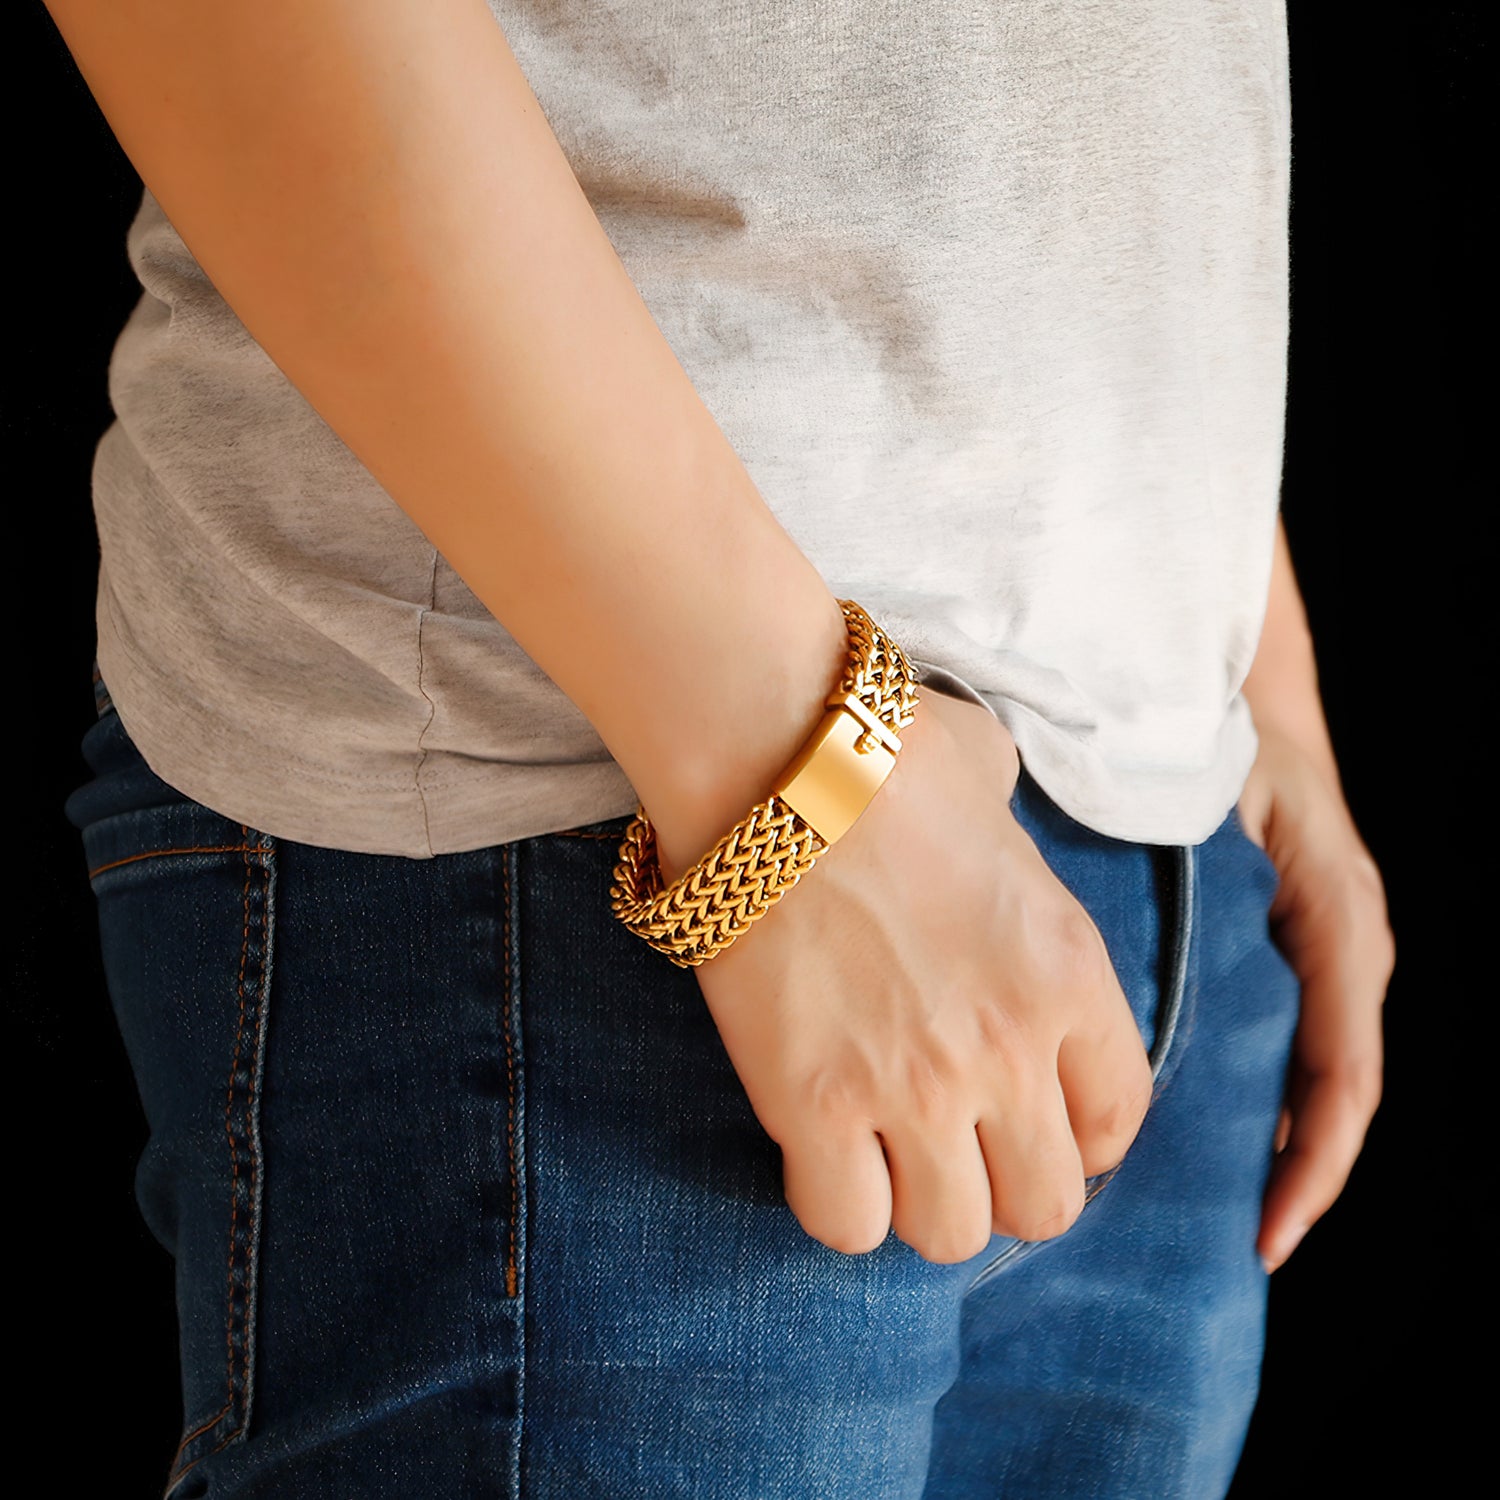 Bracelets – willows clothing